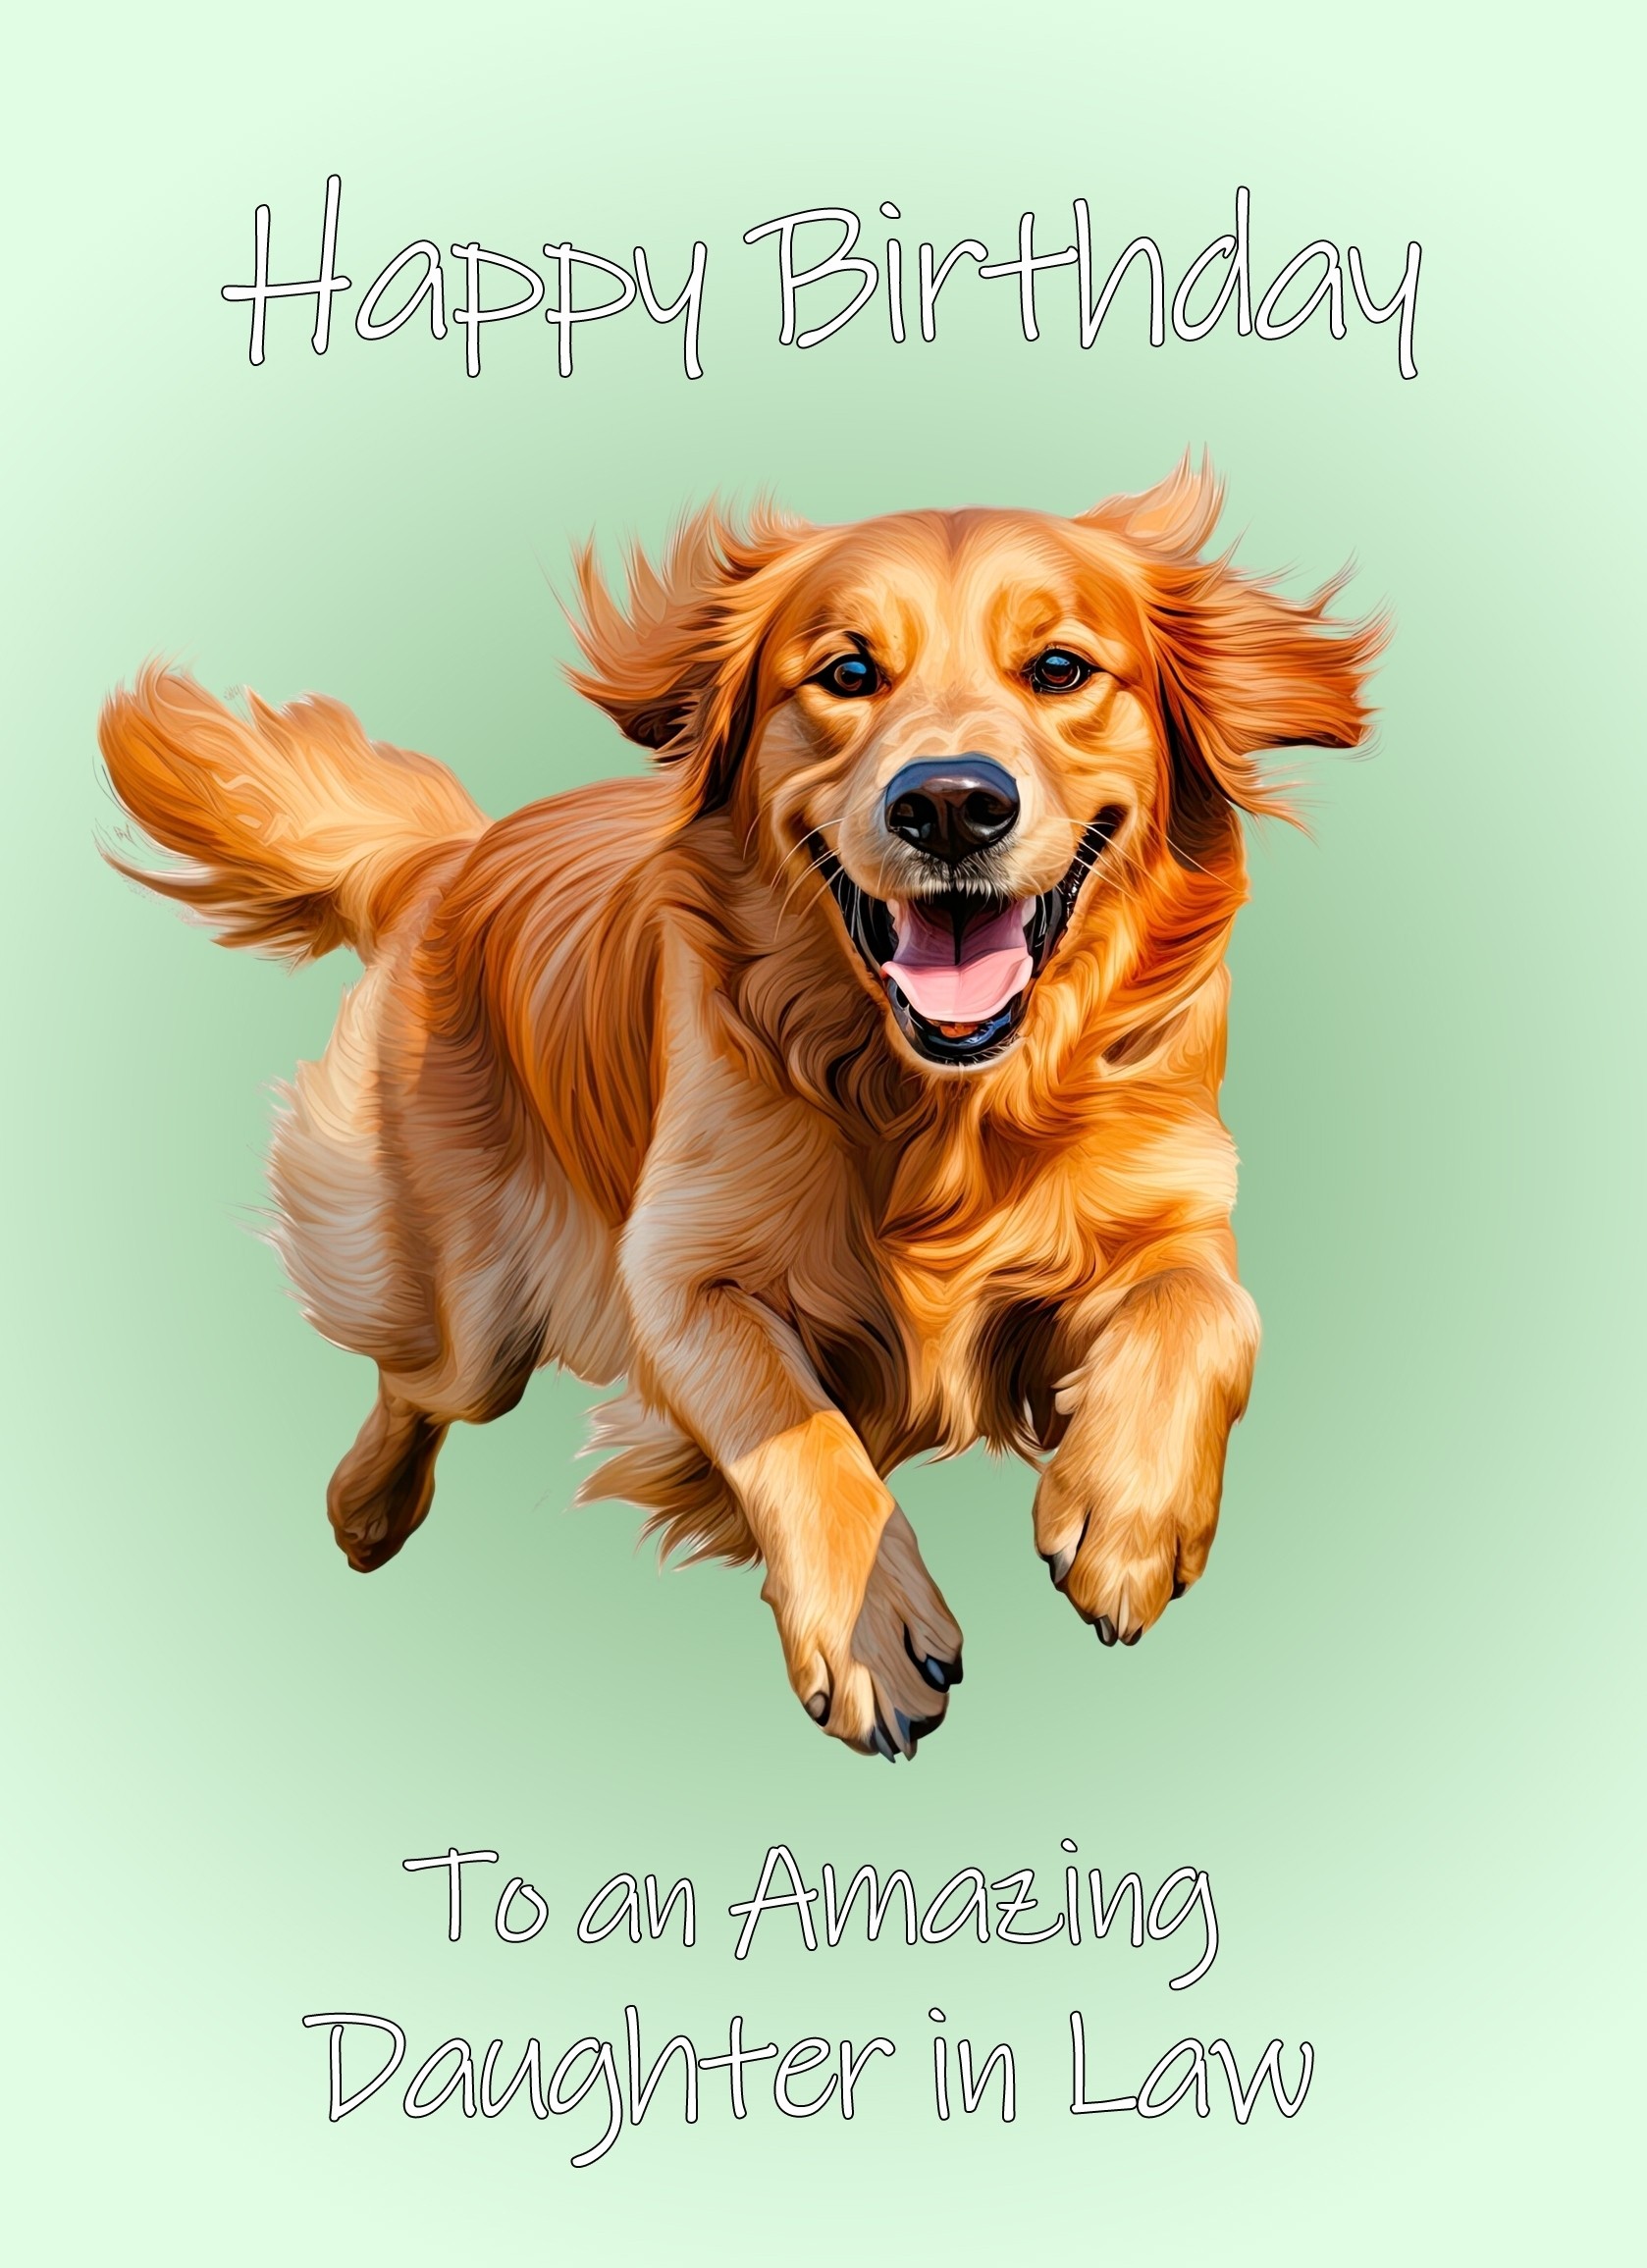 Golden Retriever Dog Birthday Card For Daughter in Law